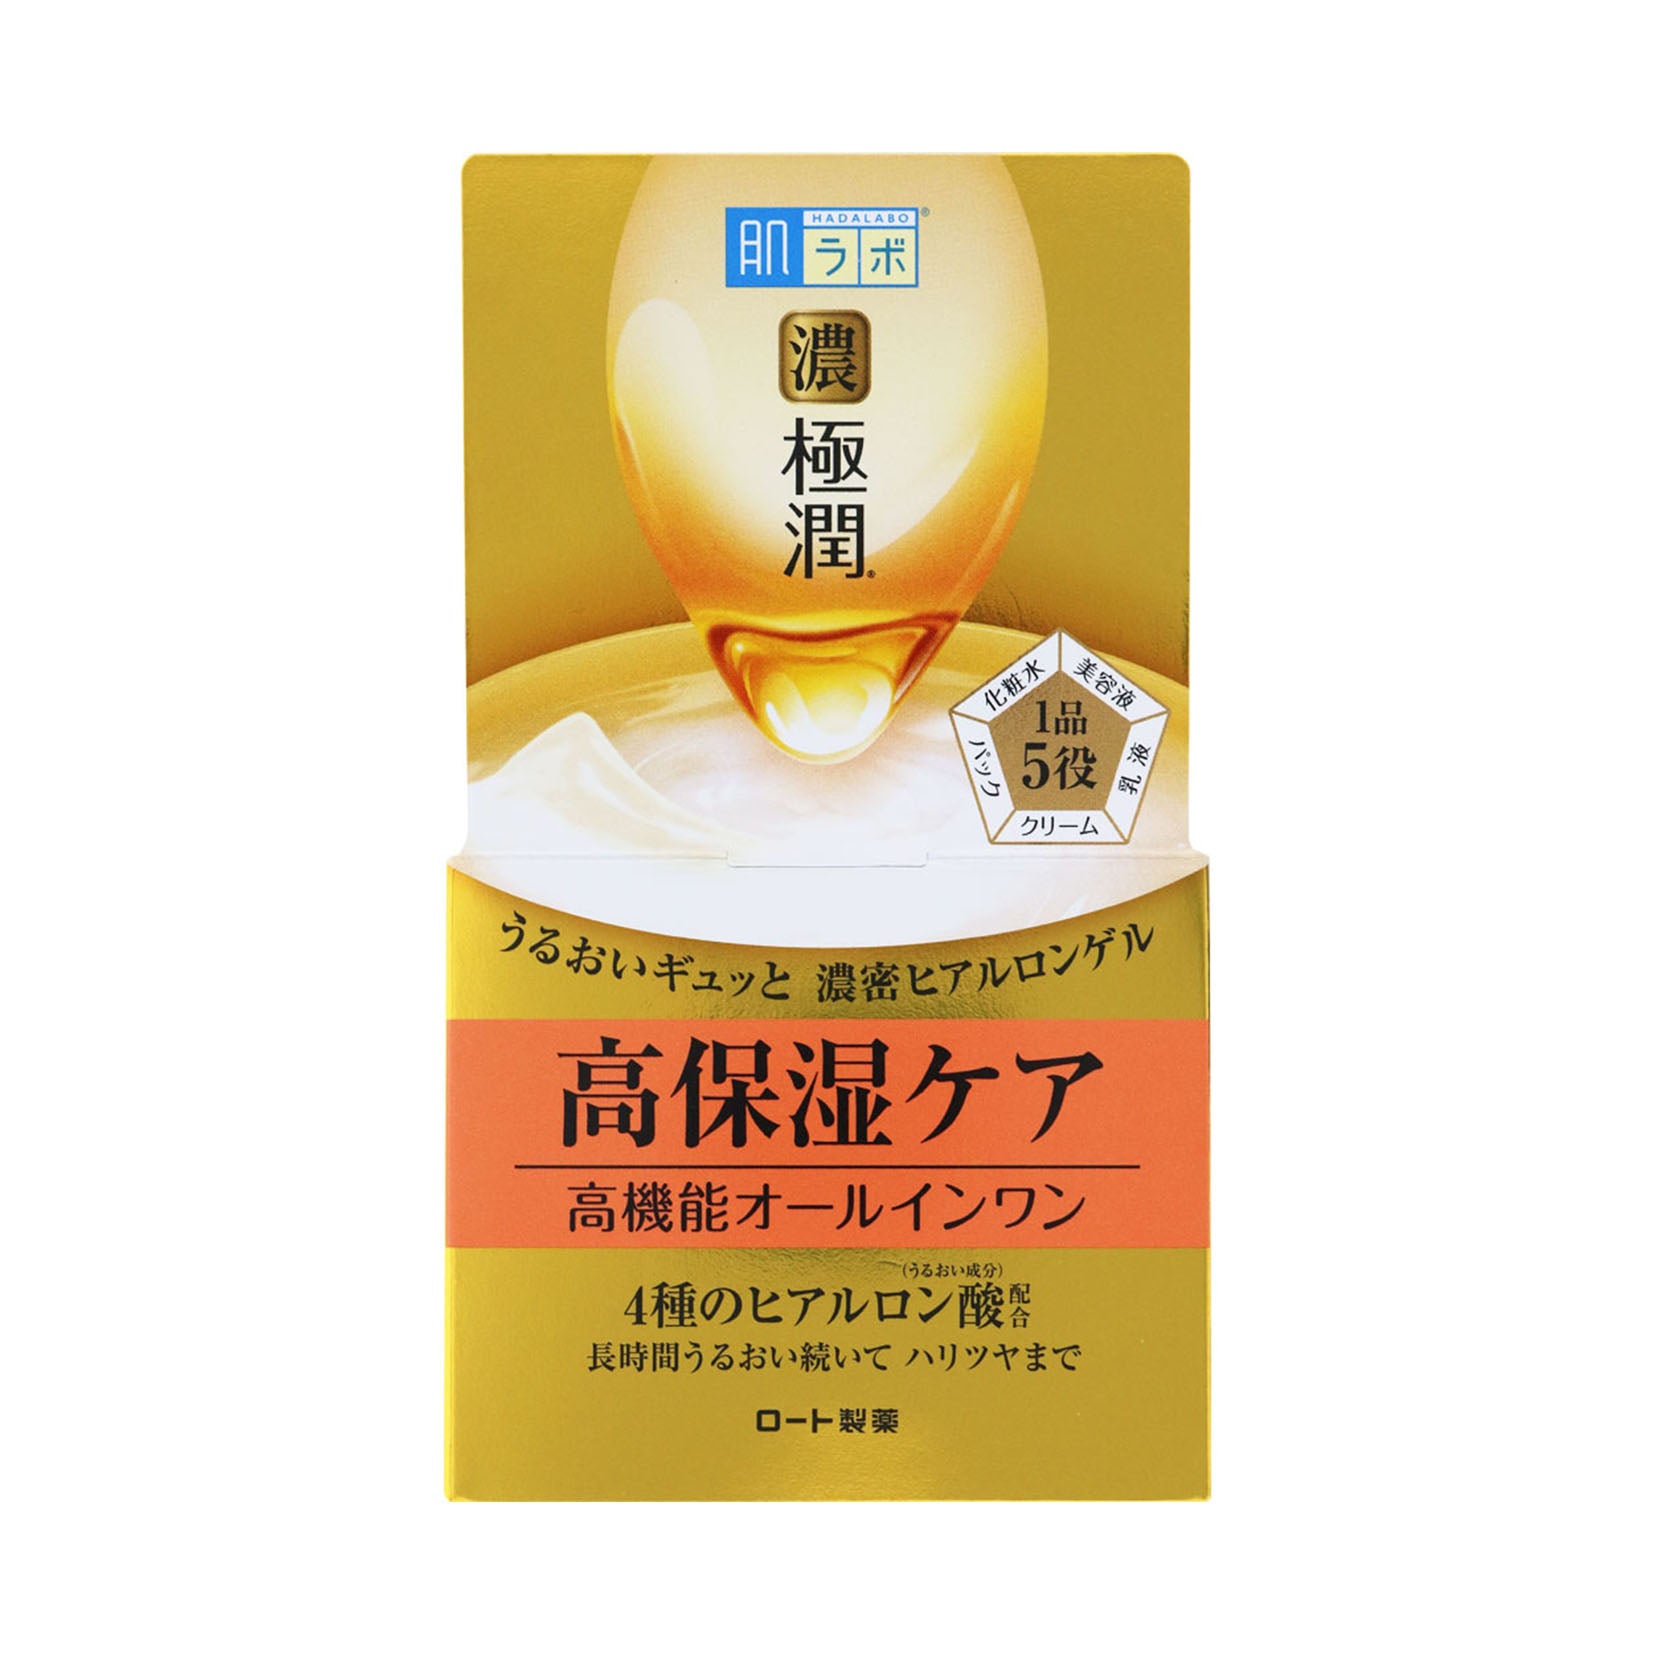 Rohto Hadalabo Thick Gokujun Hyaluronic Acid All In One Perfect Gel - 100g - Harajuku Culture Japan - Japanease Products Store Beauty and Stationery